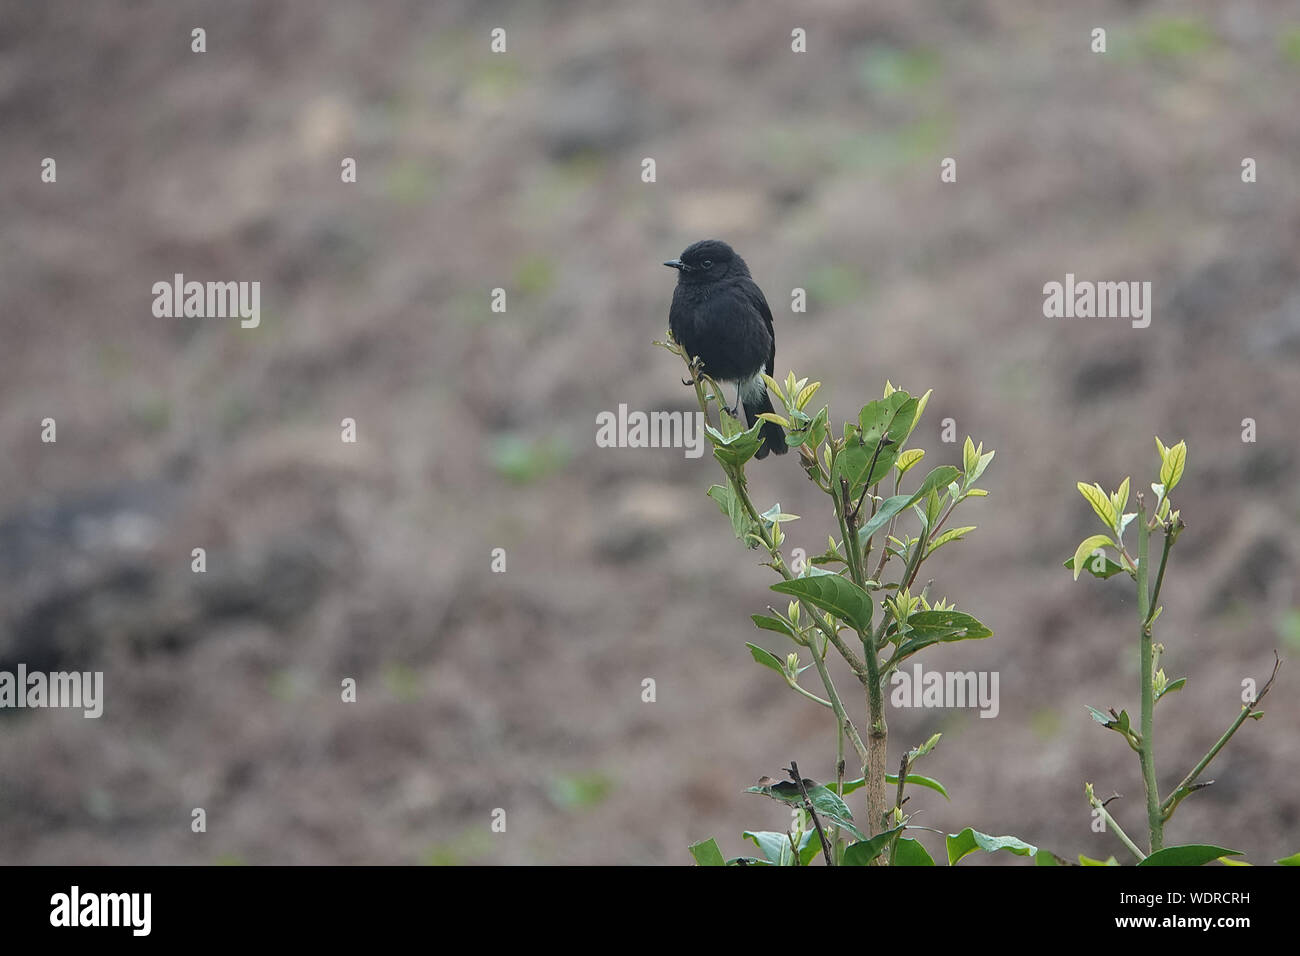 The pied bush chat is a small passerine bird found ranging from West Asia and Central Asia to the Indian subcontinent and Southeast Asia. Stock Photo